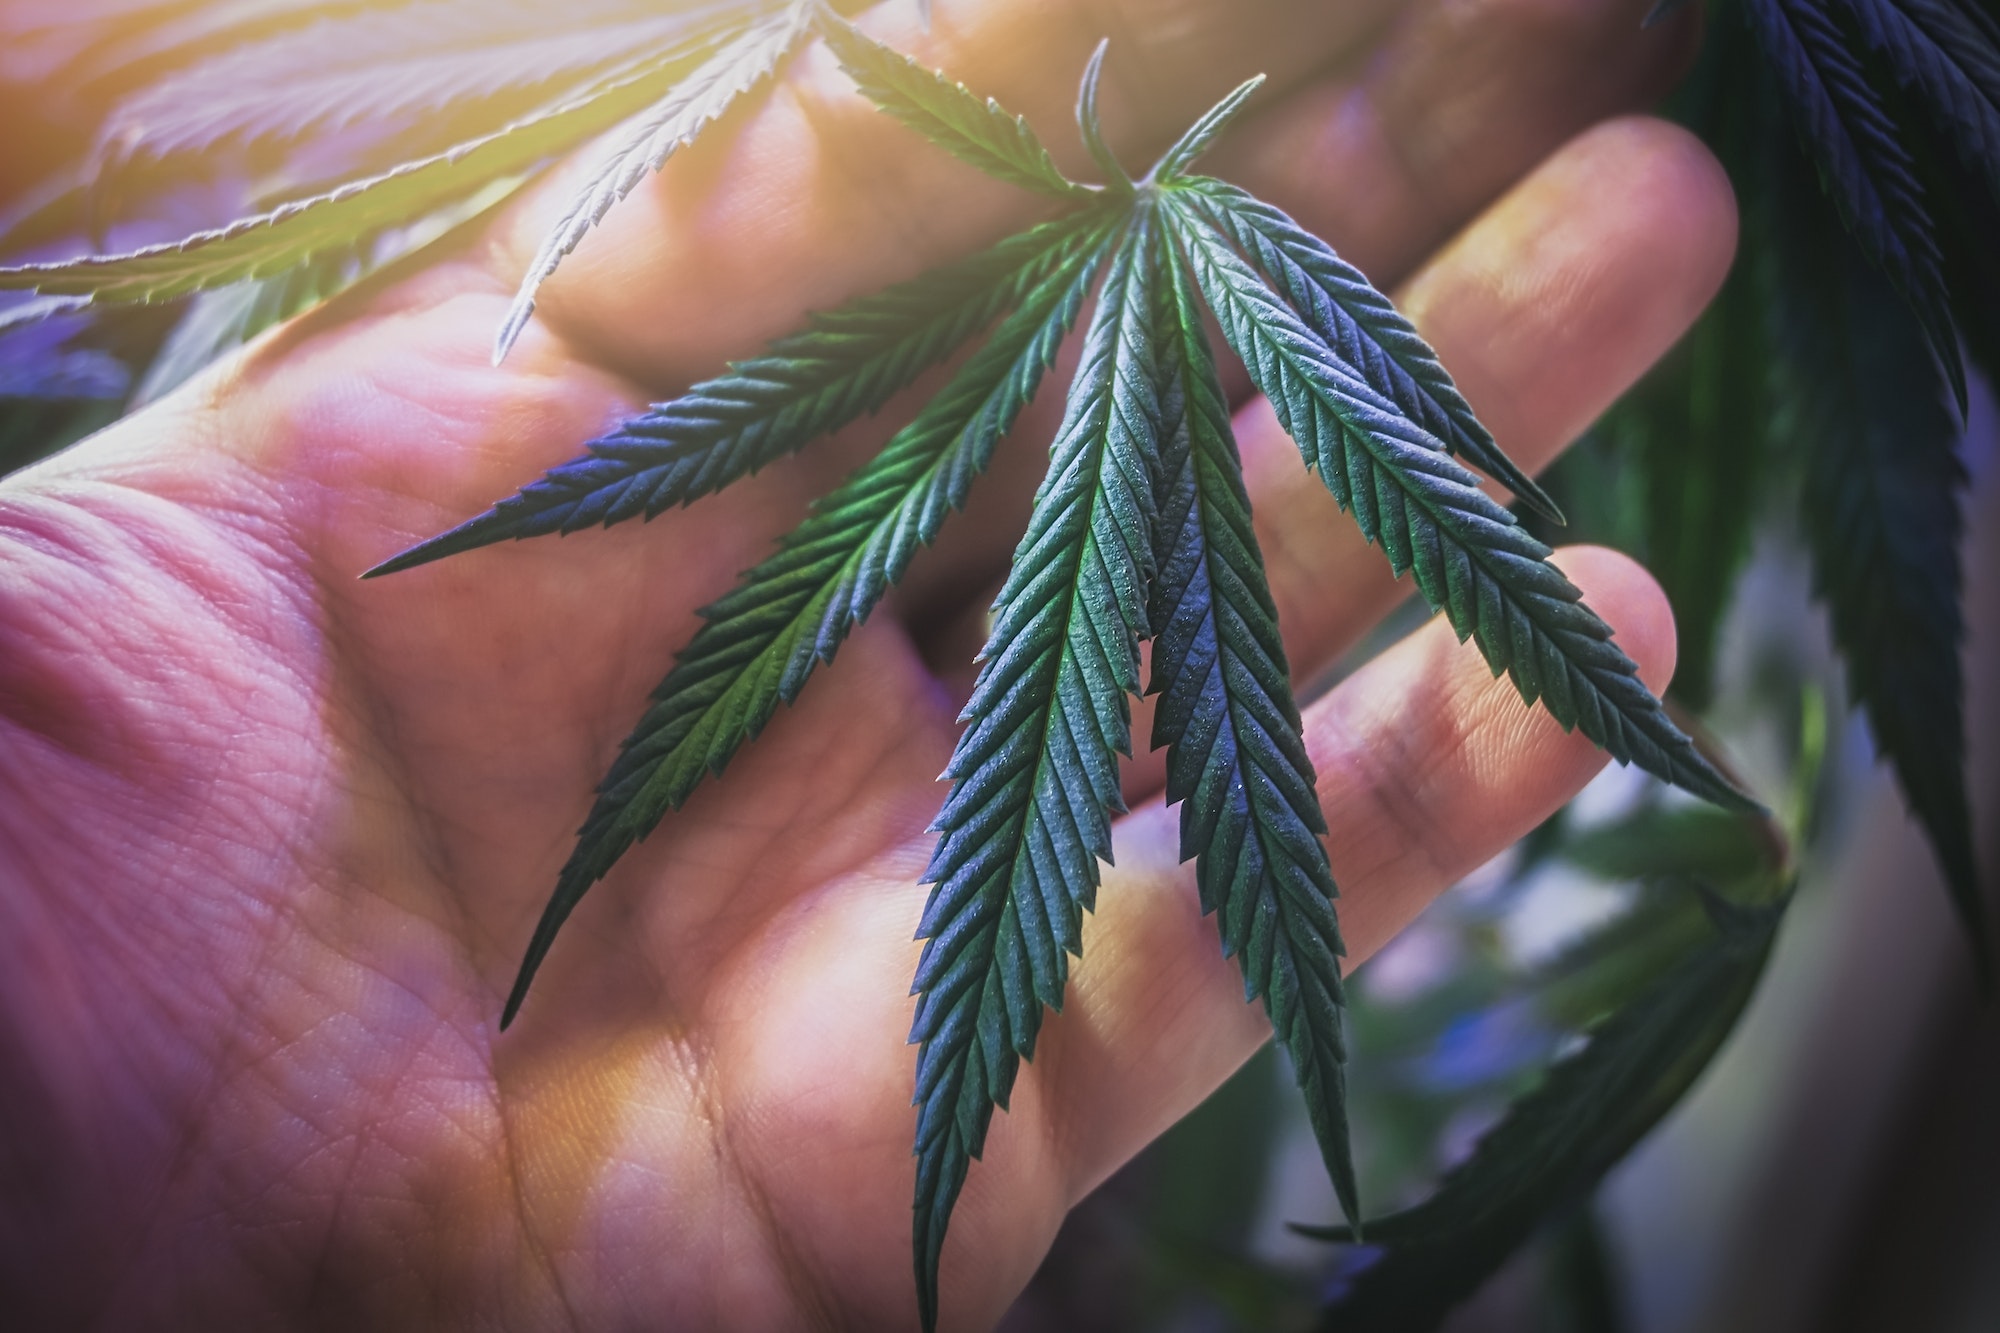 Hand holding young cannabis leaf